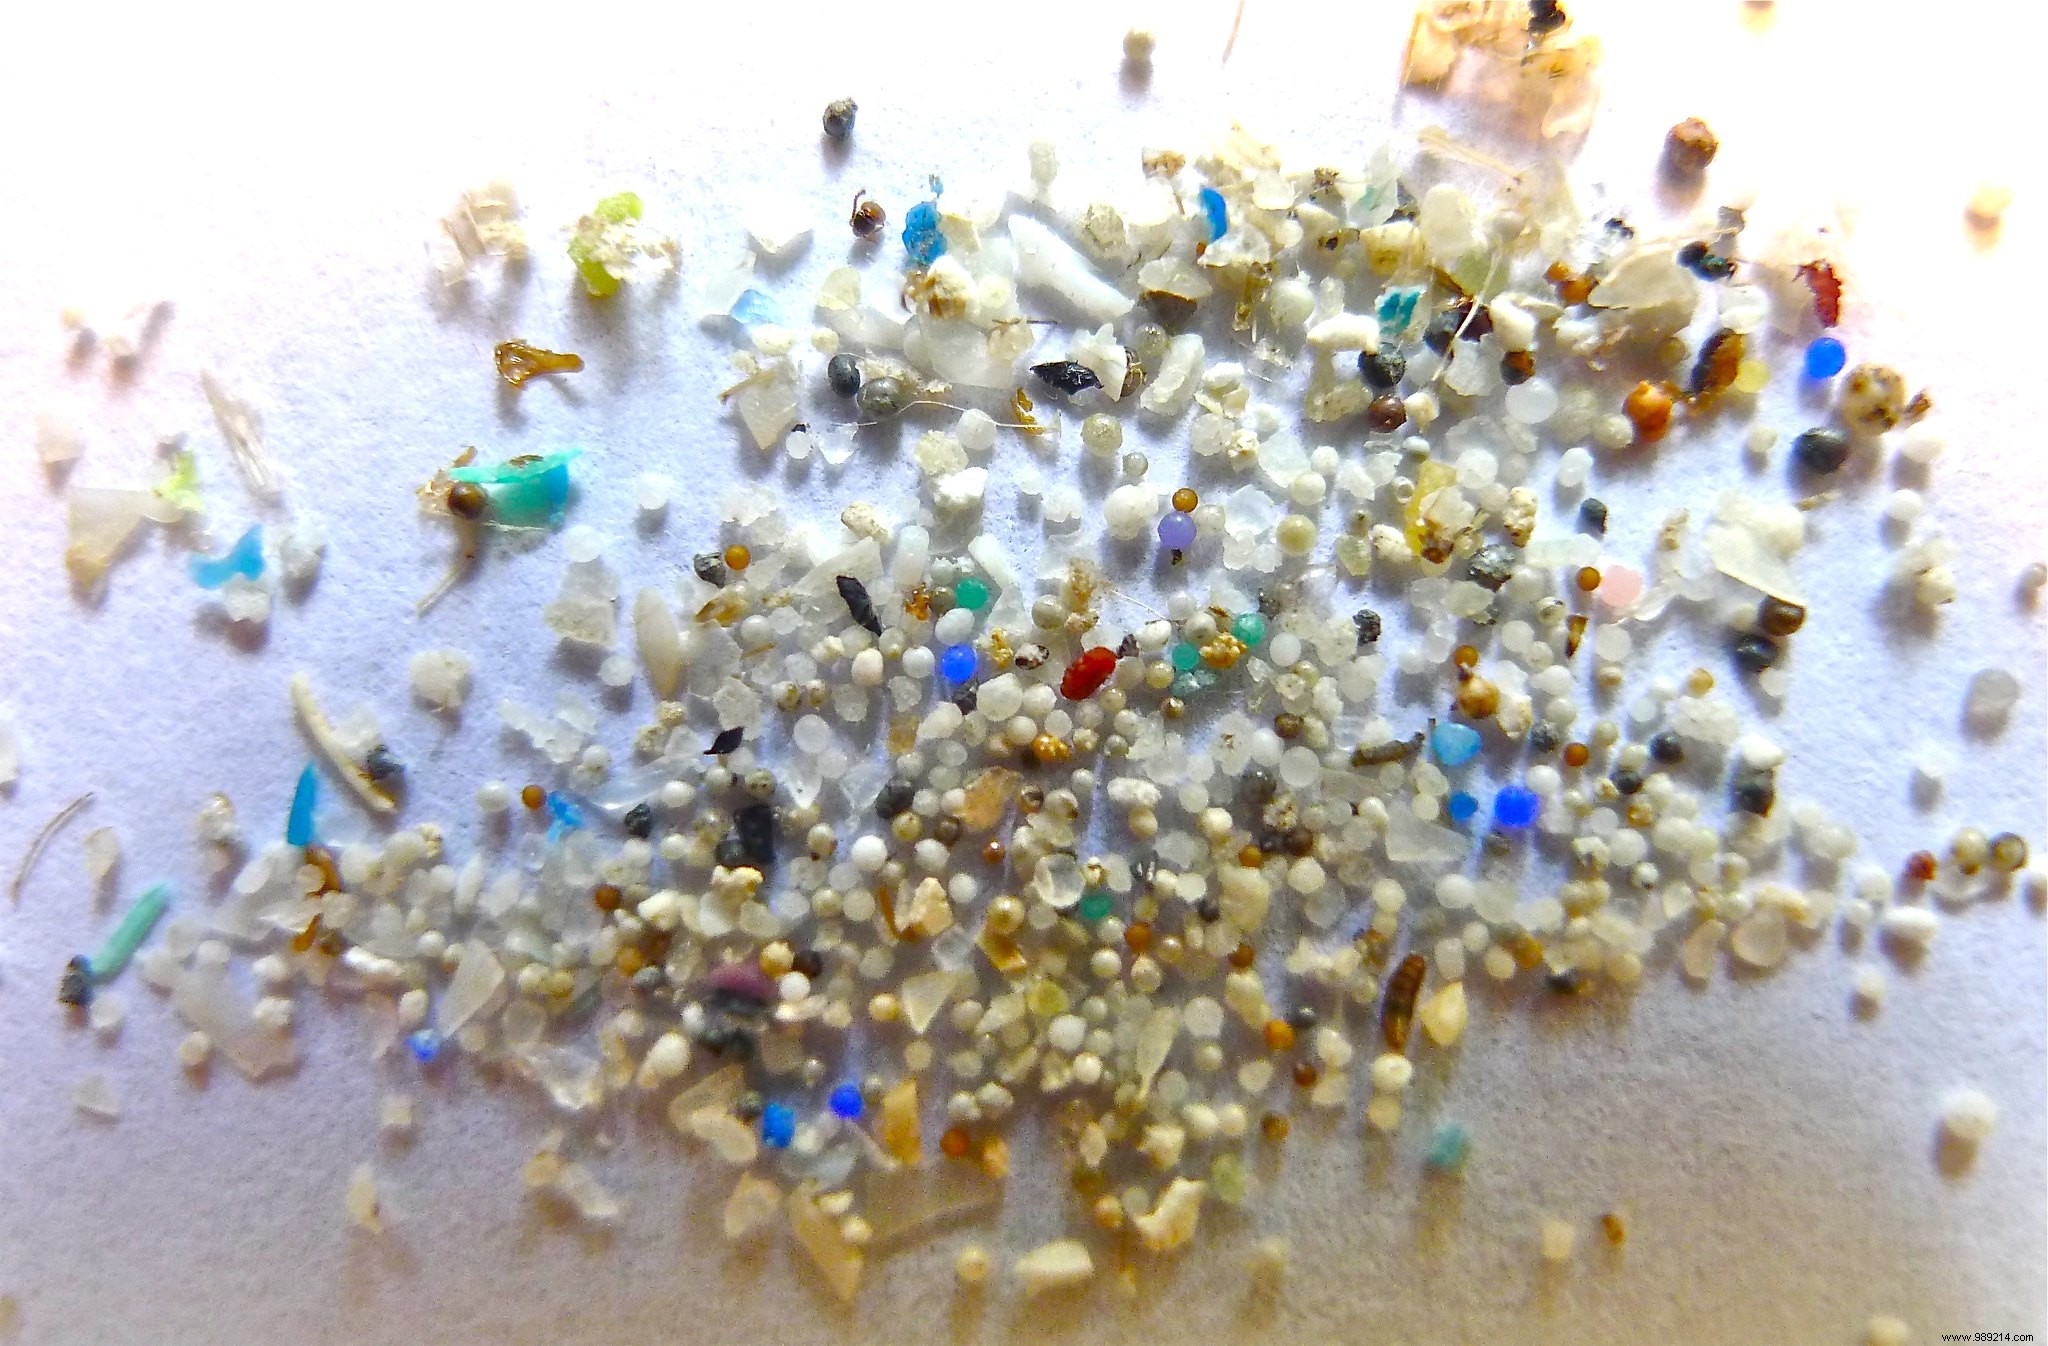 Babies ingest over a million microplastics from baby bottles! 